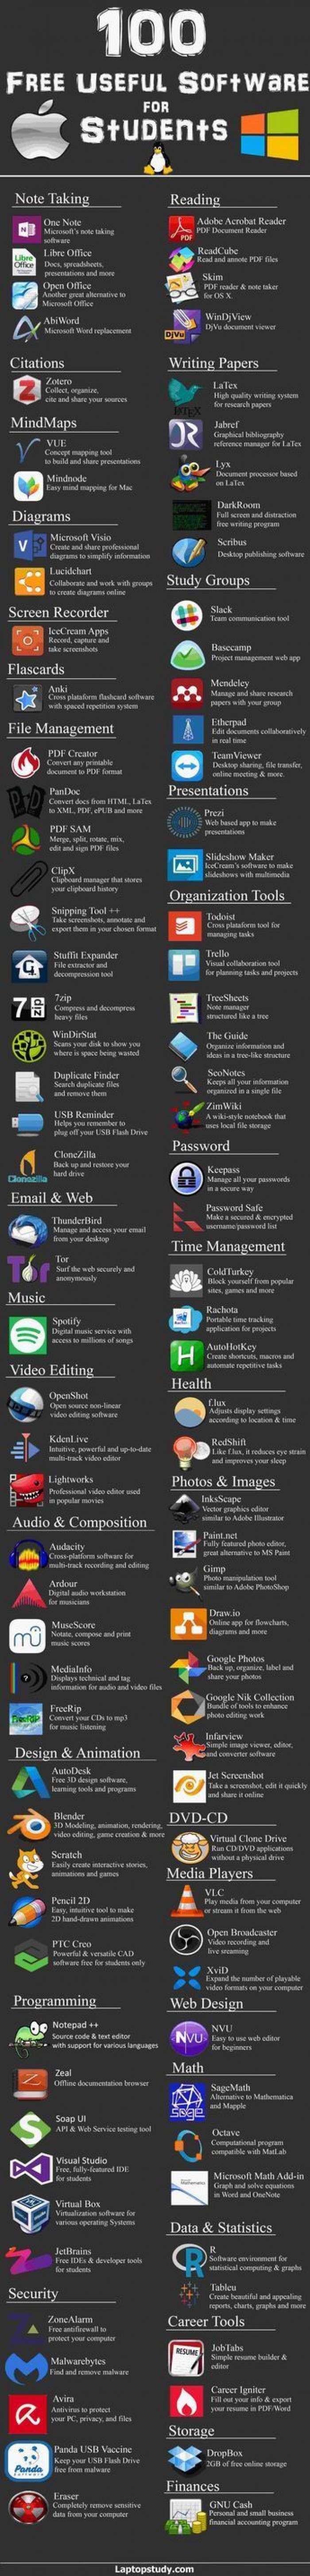 100 Free Useful Software For Students